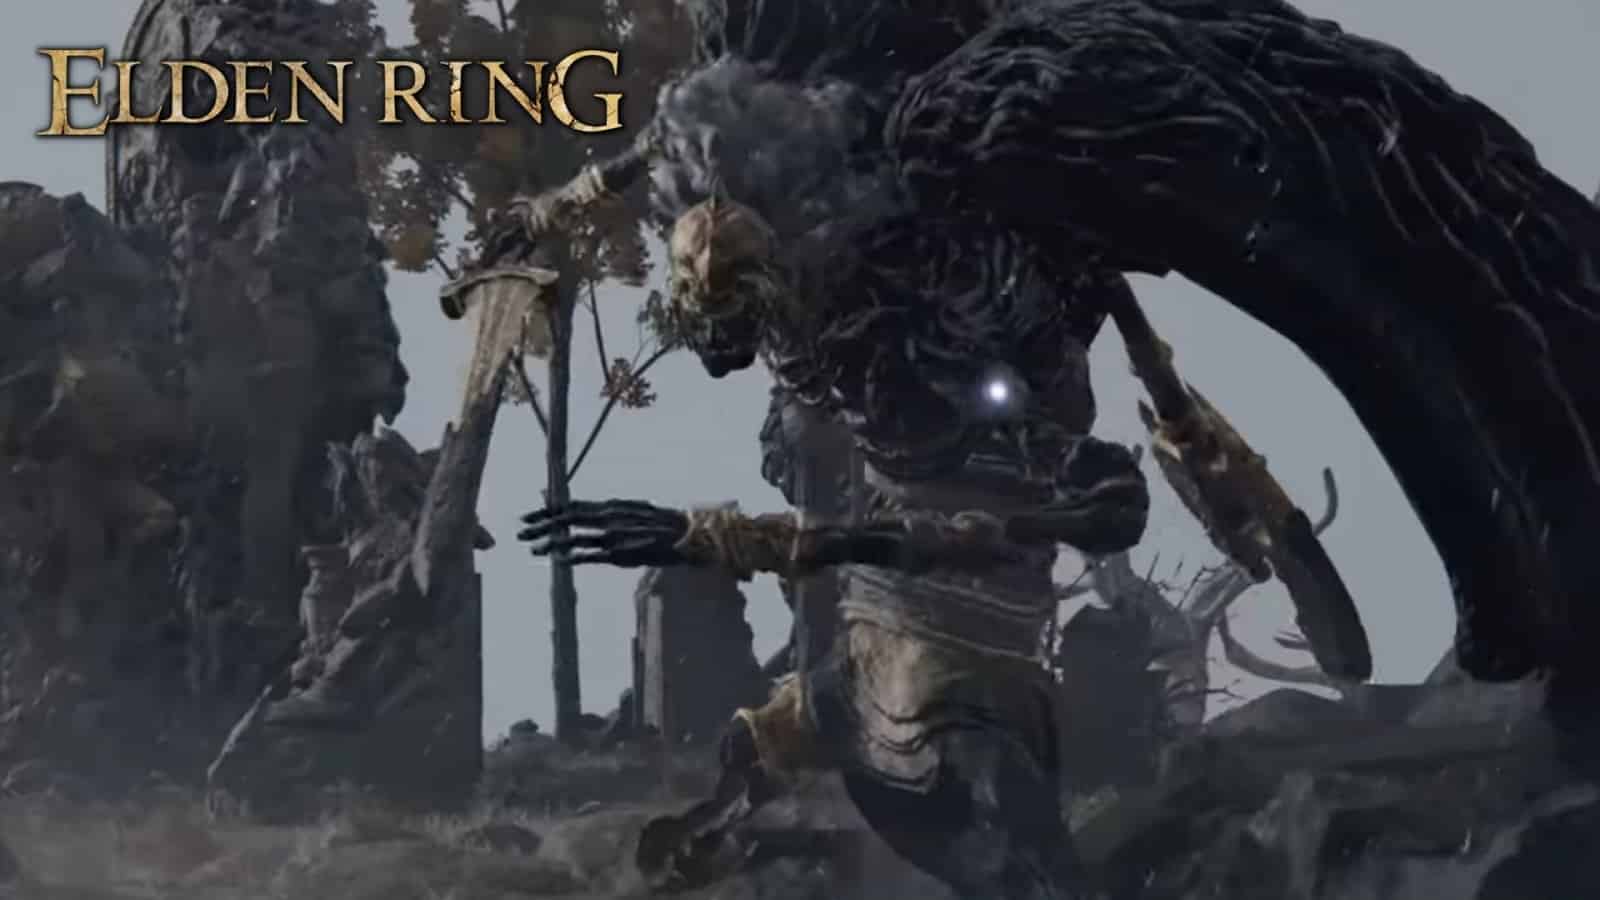 Elden Ring: Malenia, Blade of Miquella, the most tempted boss in the game